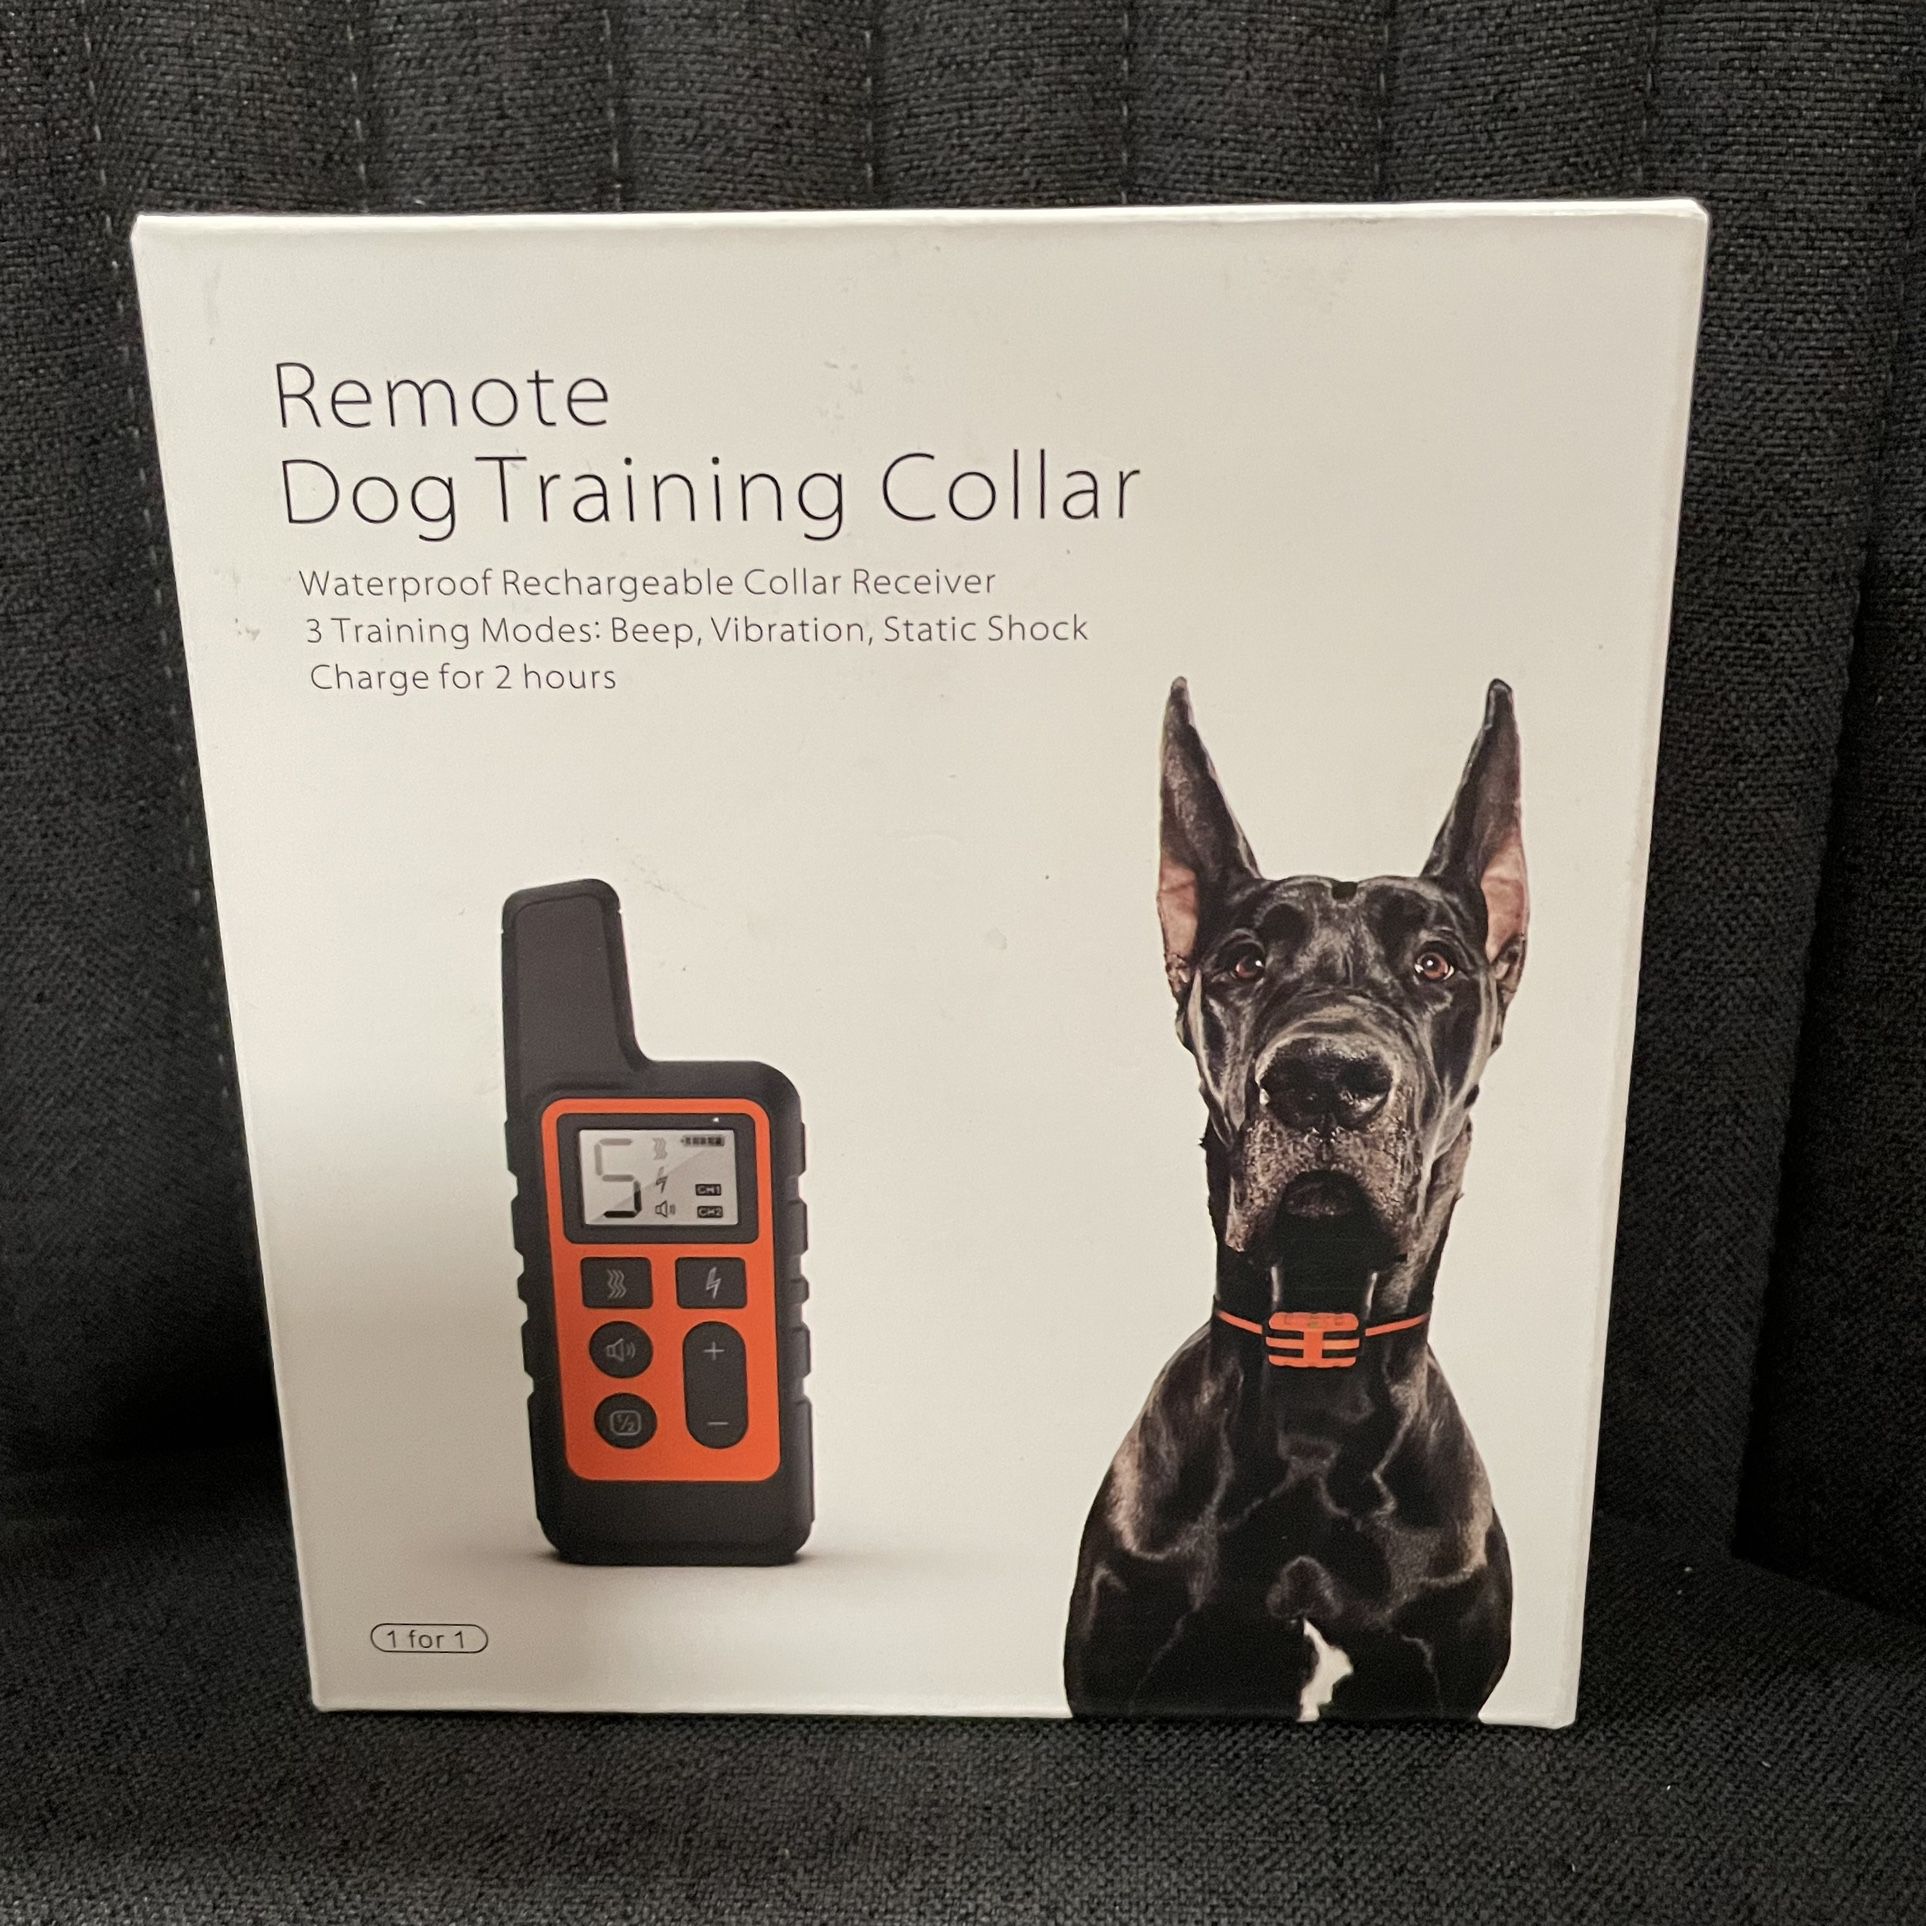 HKZOOI Dog Training Collar, Waterproof Electric Shock Collars for Dog with Remote, 3 Training Modes, Beep, Vibration and Electric Shock, Rechargeable 